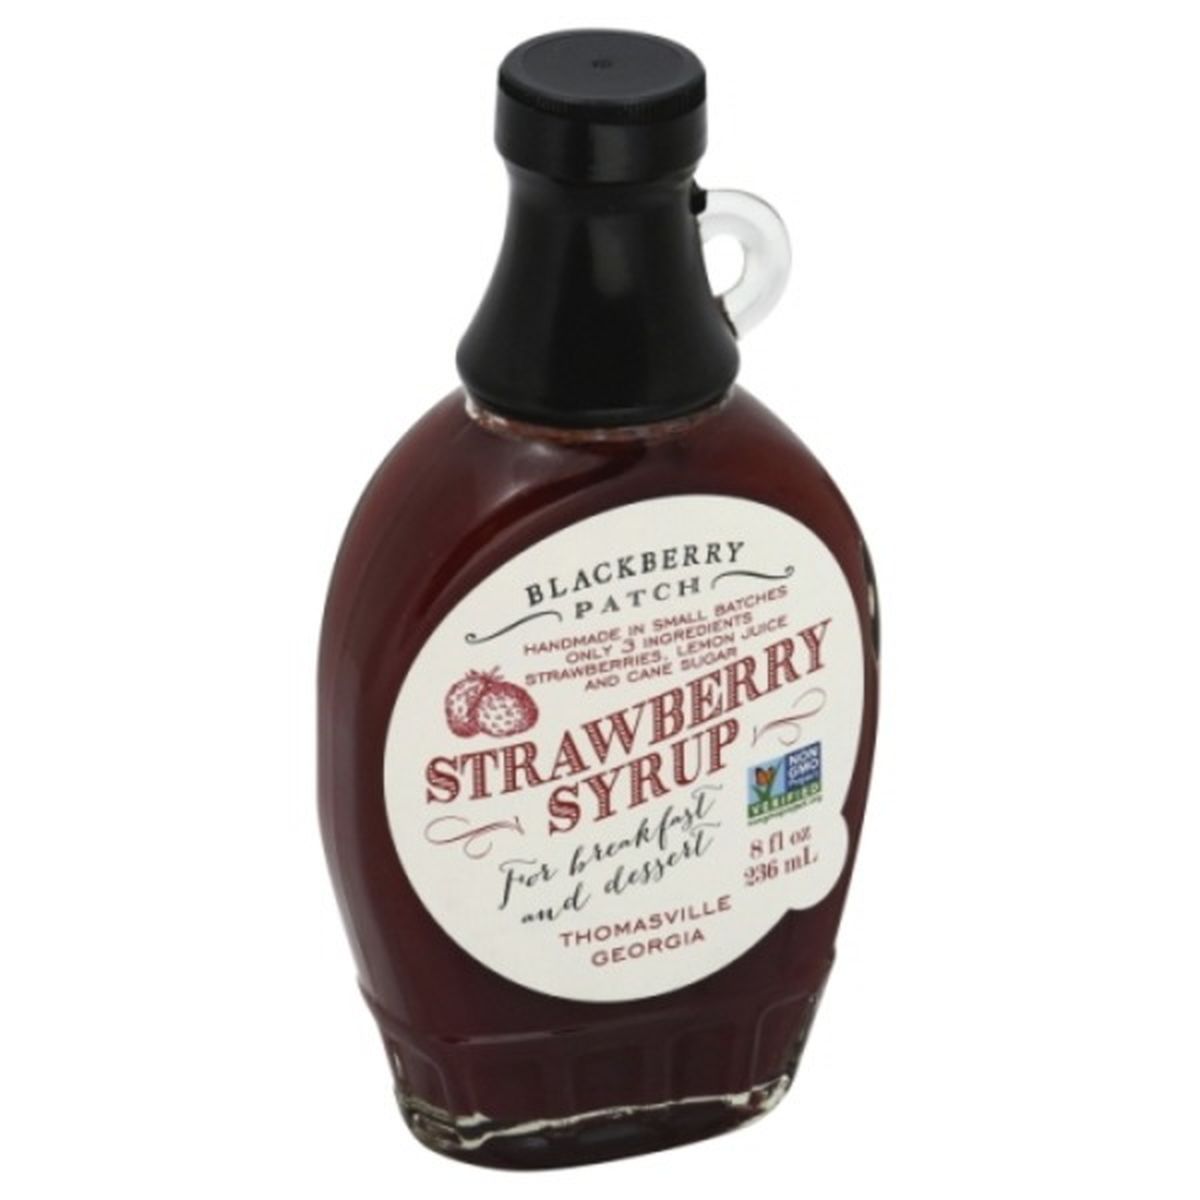 Calories in Blackberry Patch Syrup, Strawberry